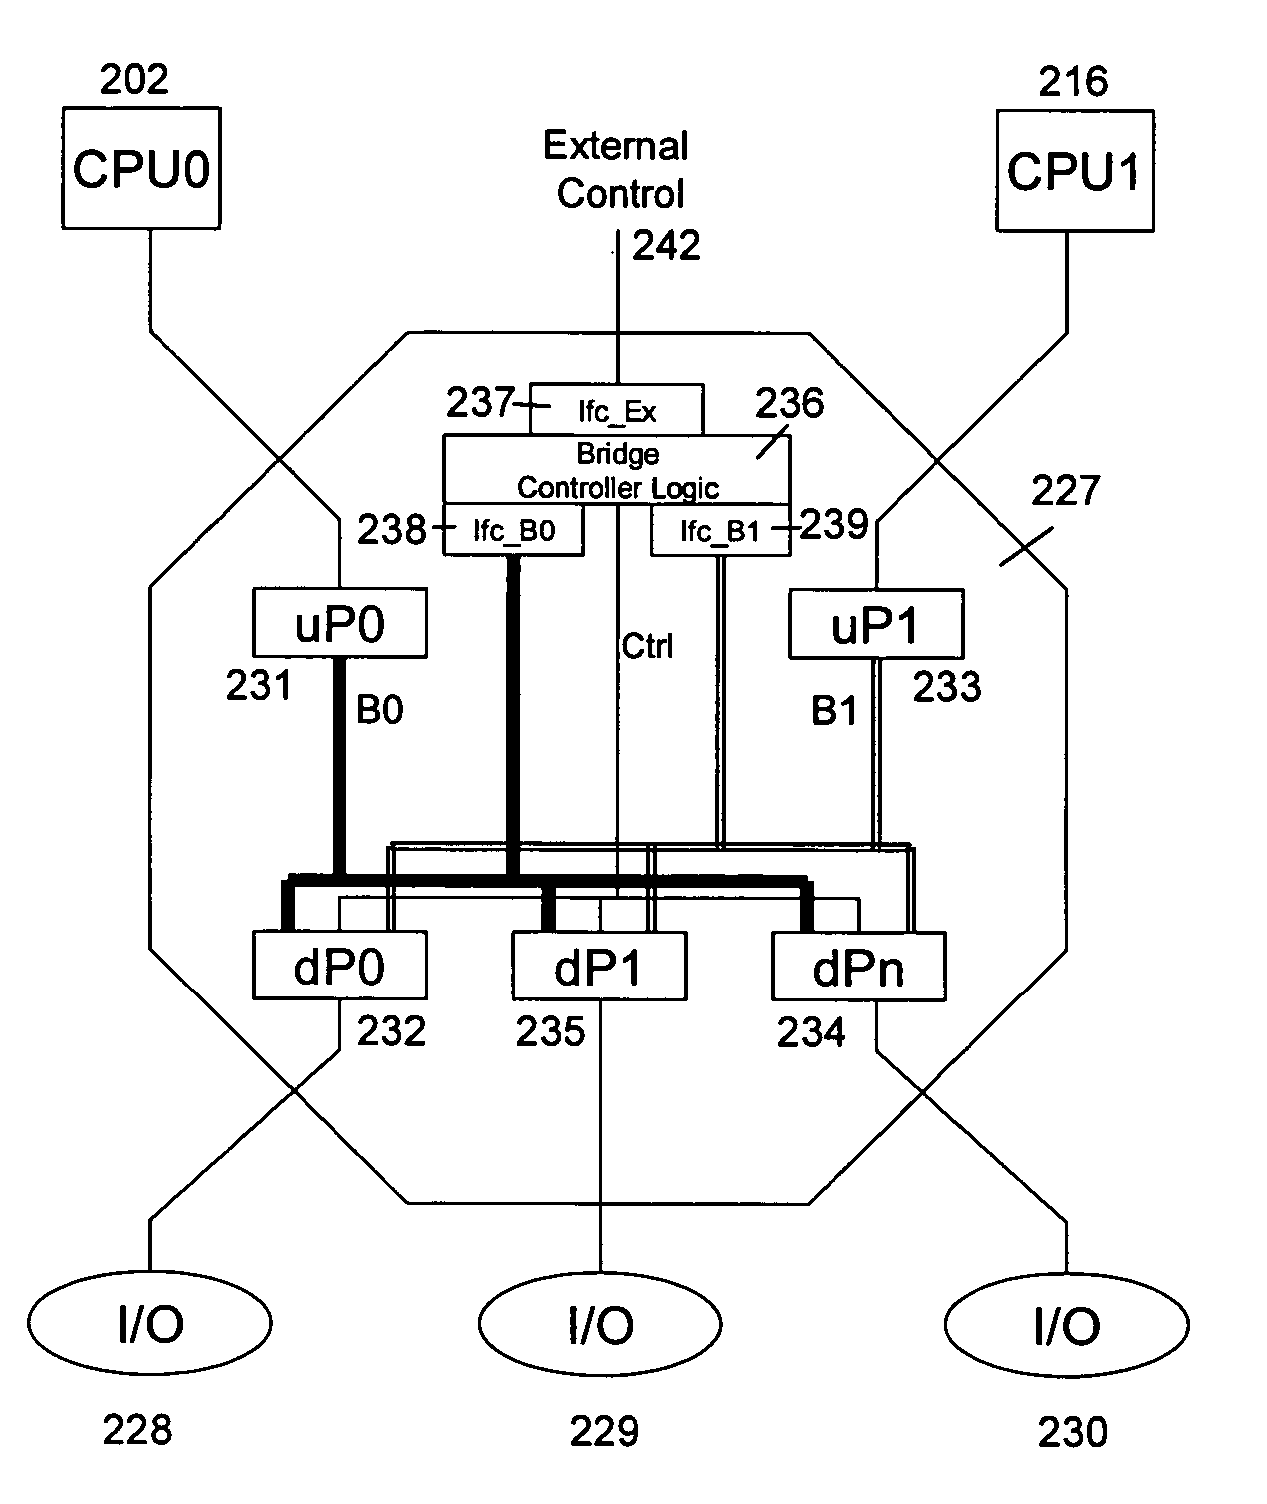 Configurable PCI express switch which allows multiple CPUs to be connected to multiple I/O devices